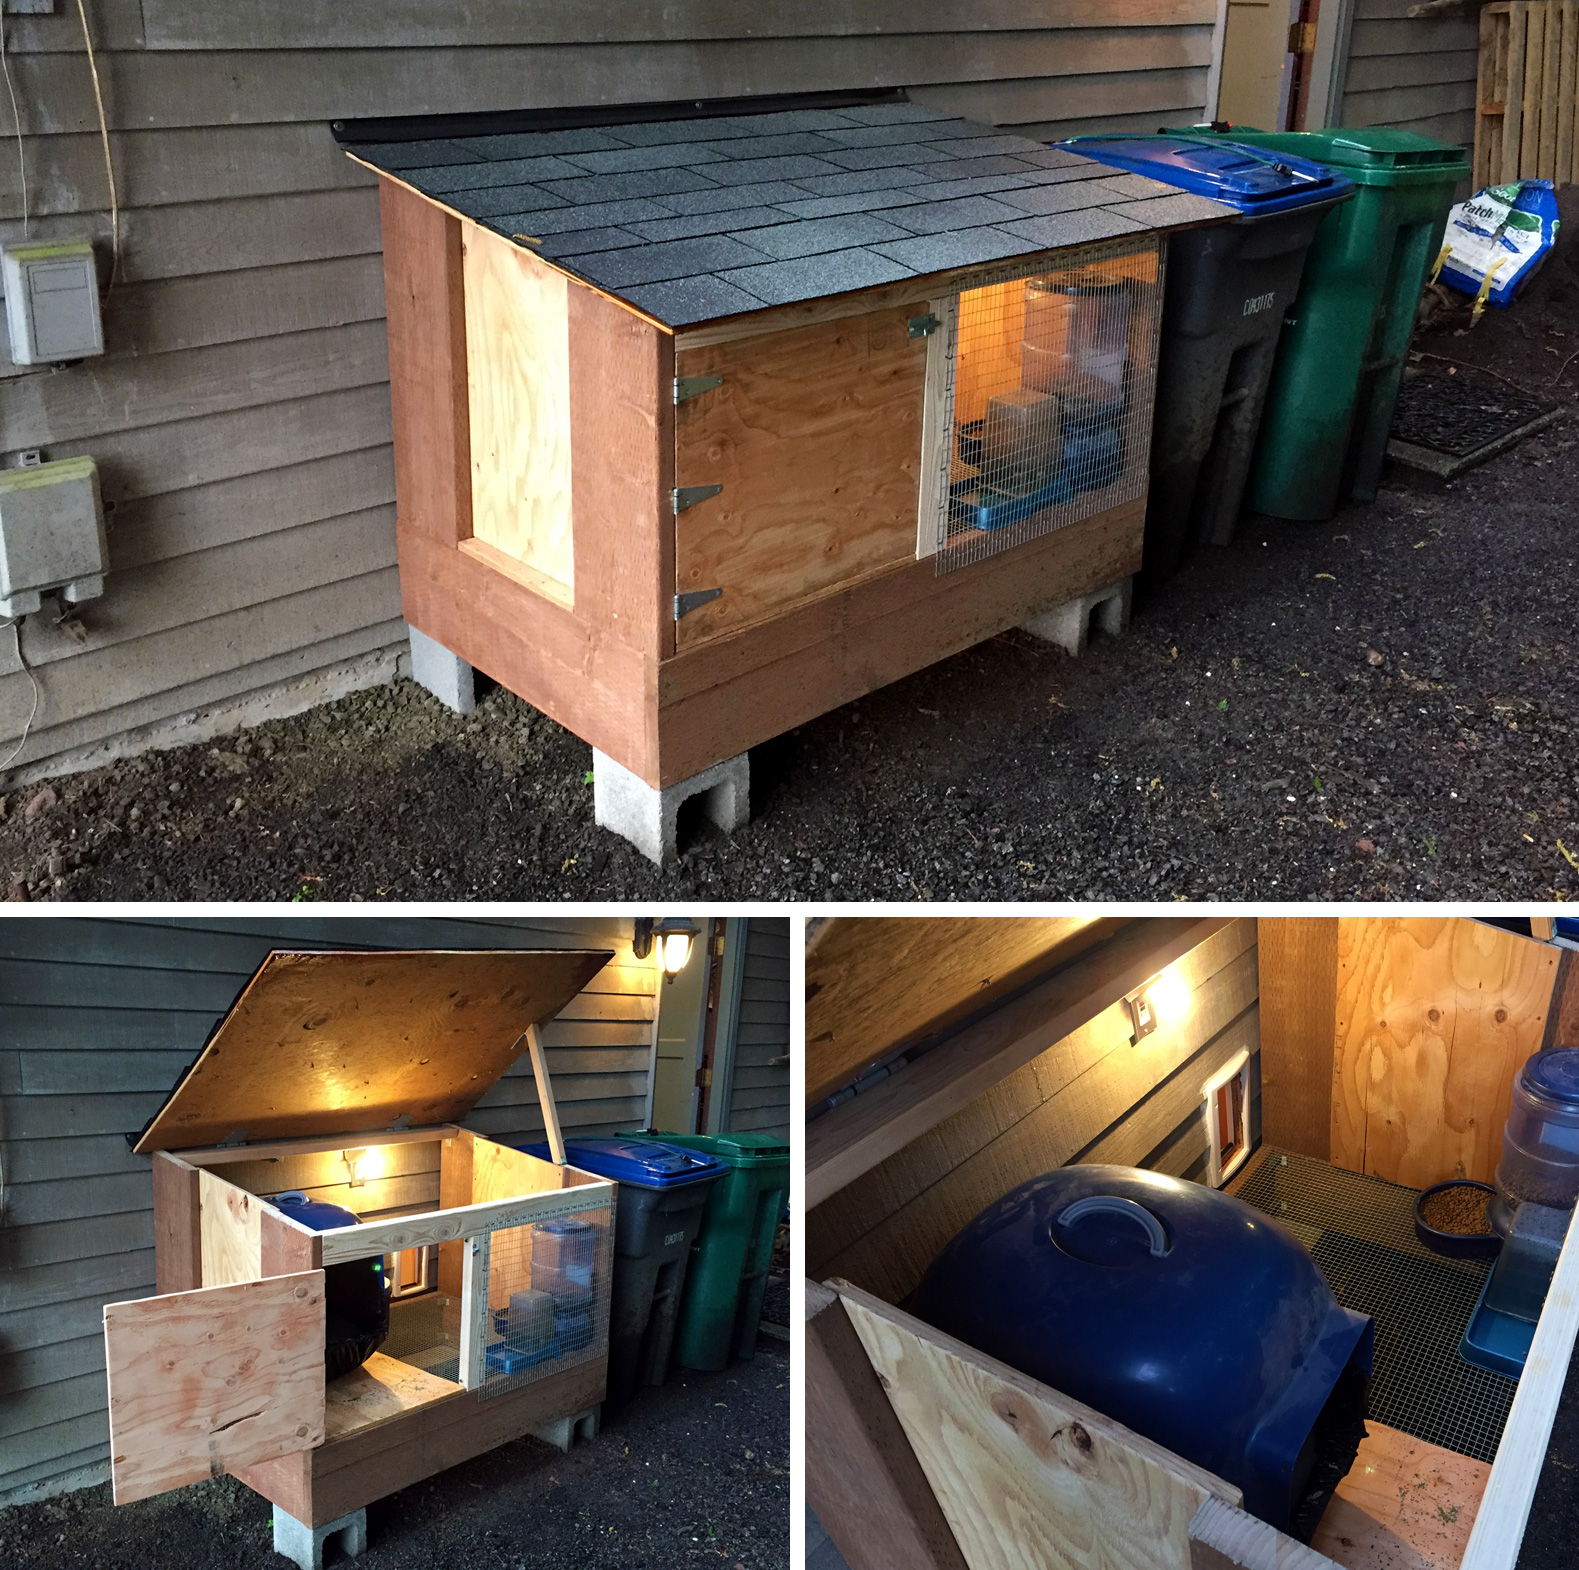 Outdoor Cat Room Gone Are The Litter Box Odors And The Food Messes In Our Downstairs Bathroom Forever Outdoor Cat House Outdoor Cat Shelter Feral Cat House